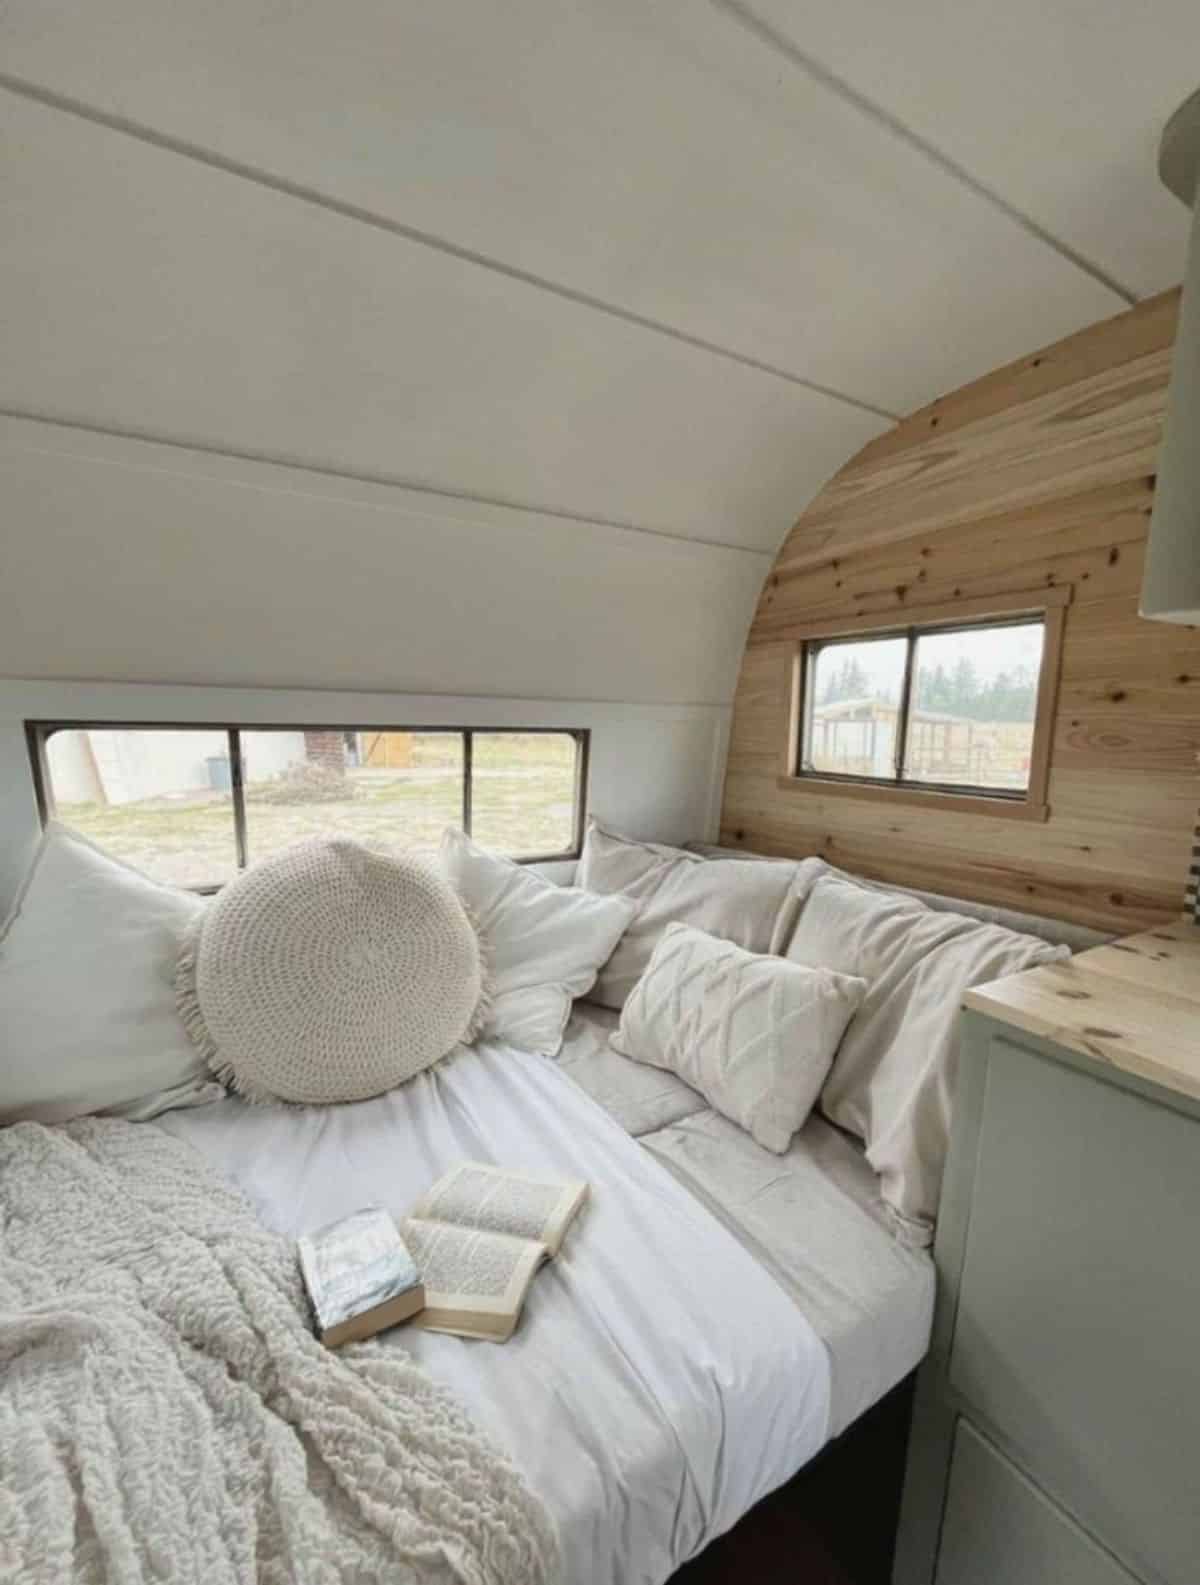 Second bed on the opposite walls of renovated tiny home